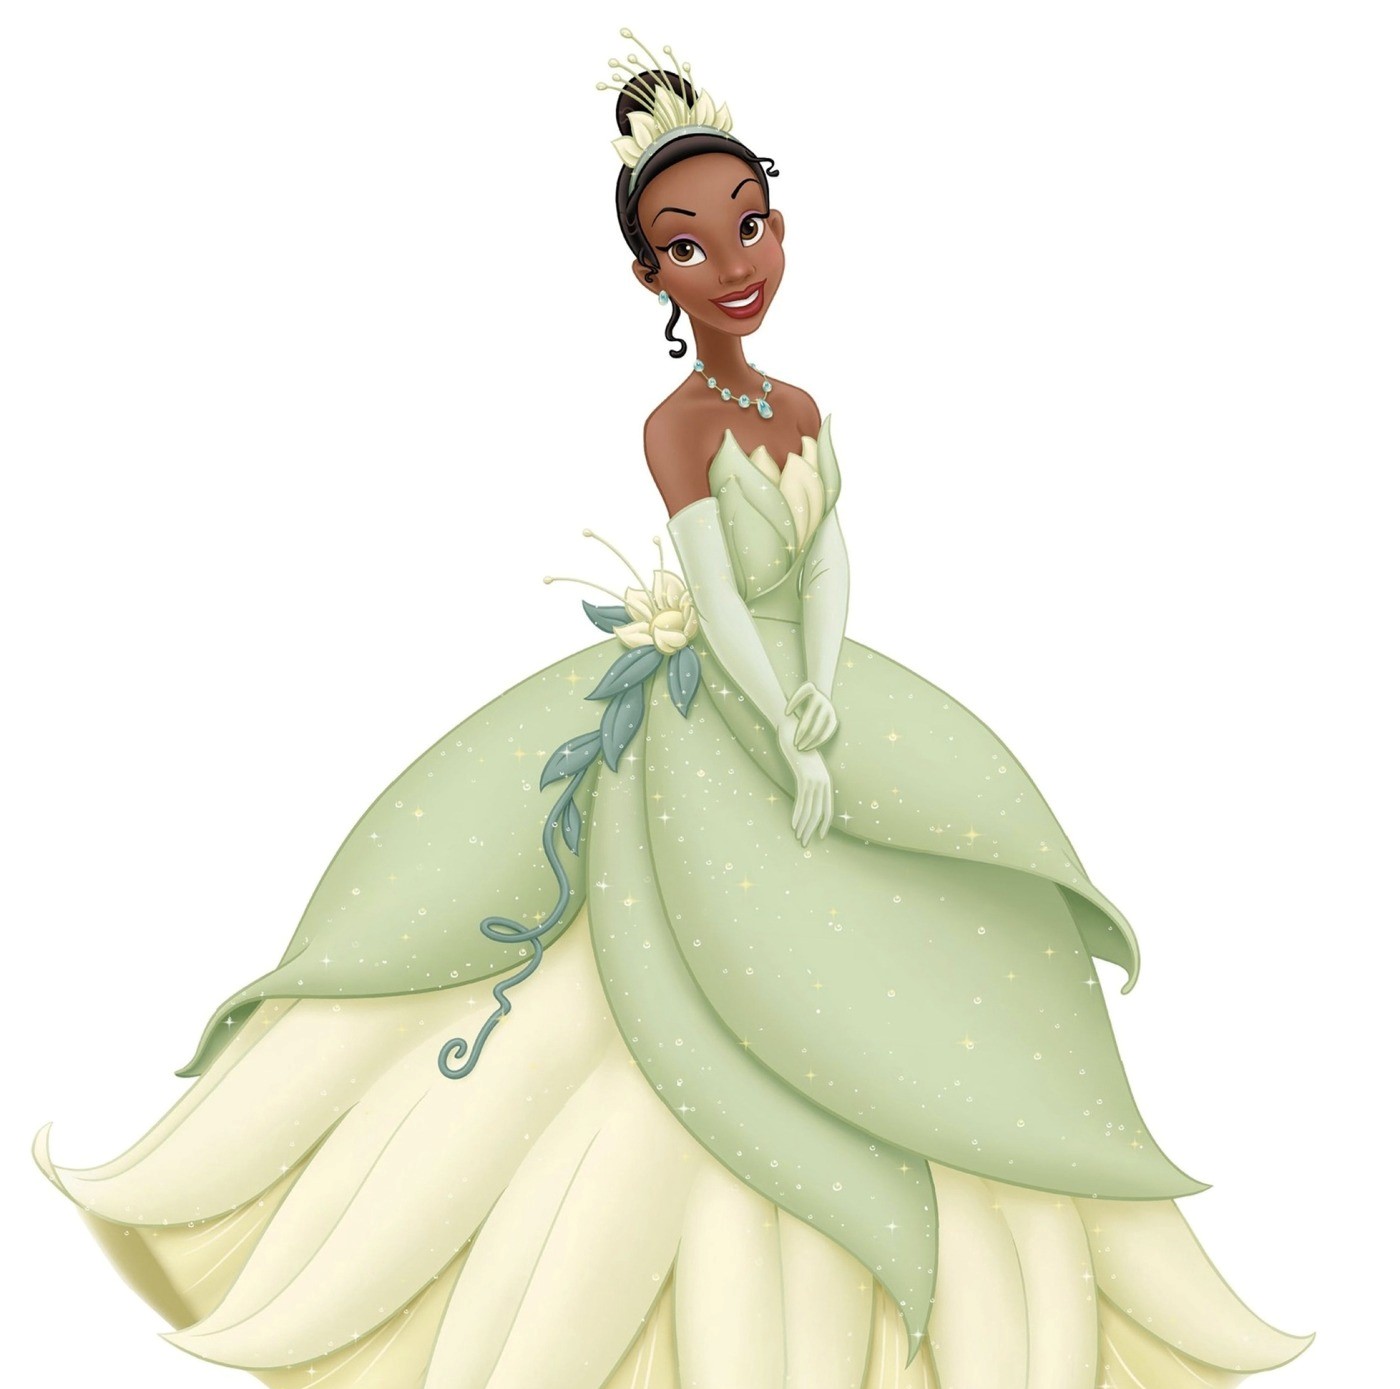 14-facts-about-tiana-the-princess-and-the-frog